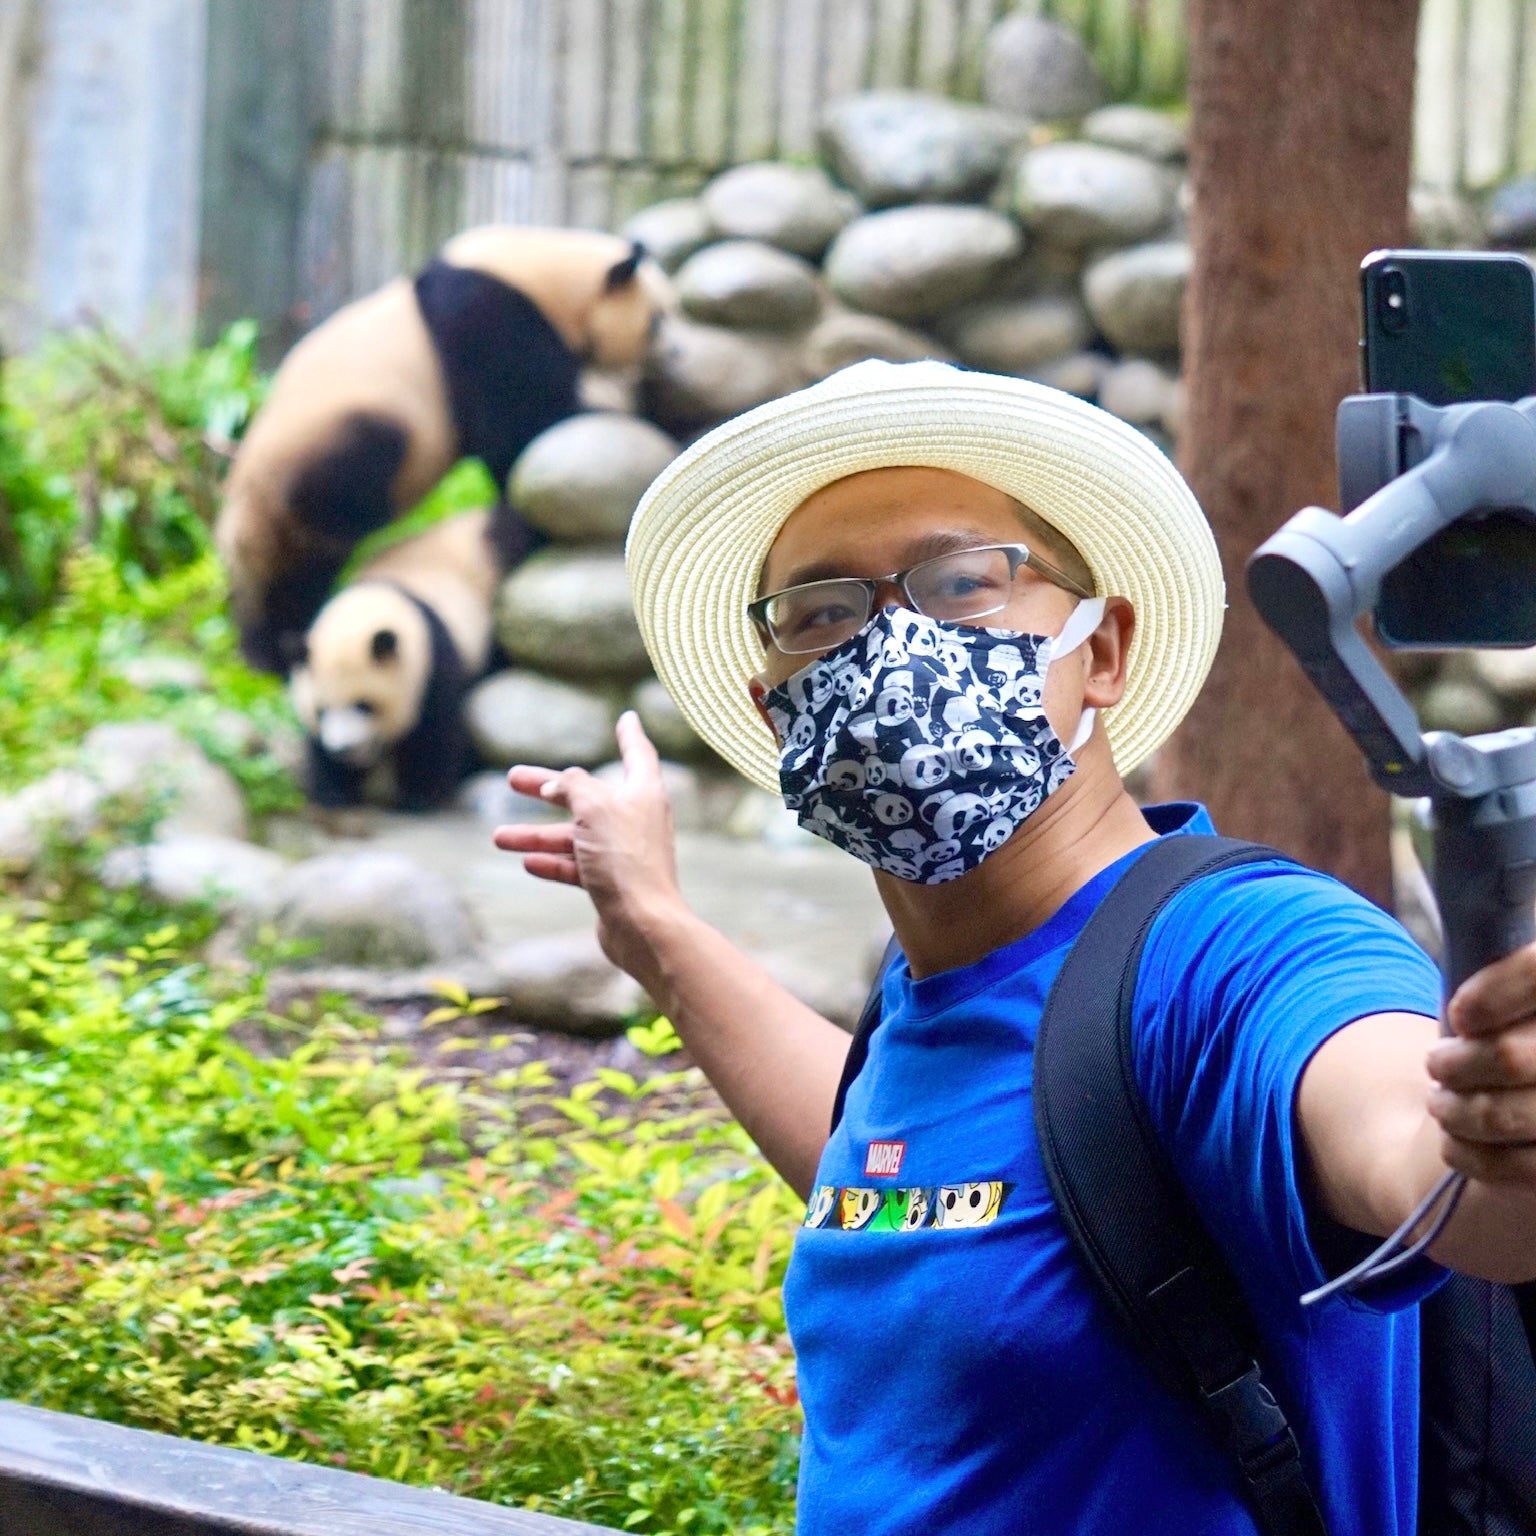 Guided tour to visit giant pandas